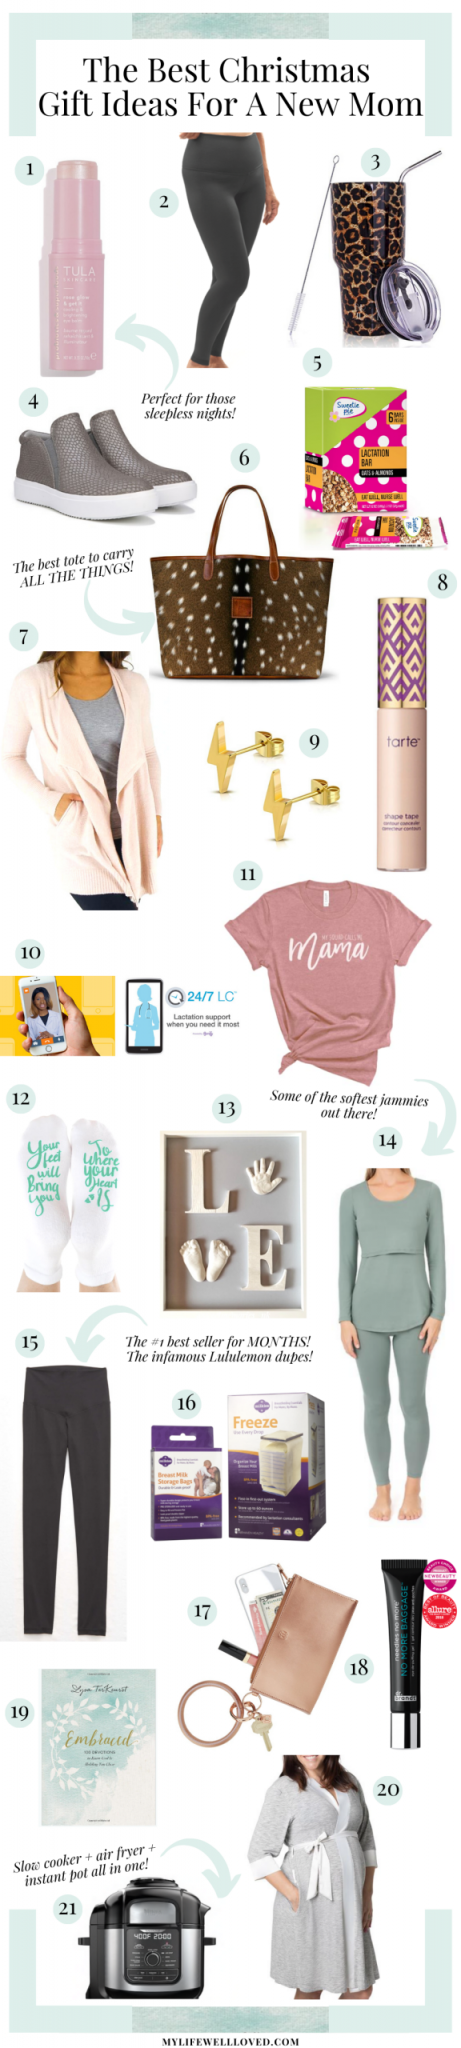 50 Gifts for Working Moms - Gifts They Actually Want [ UPDATED